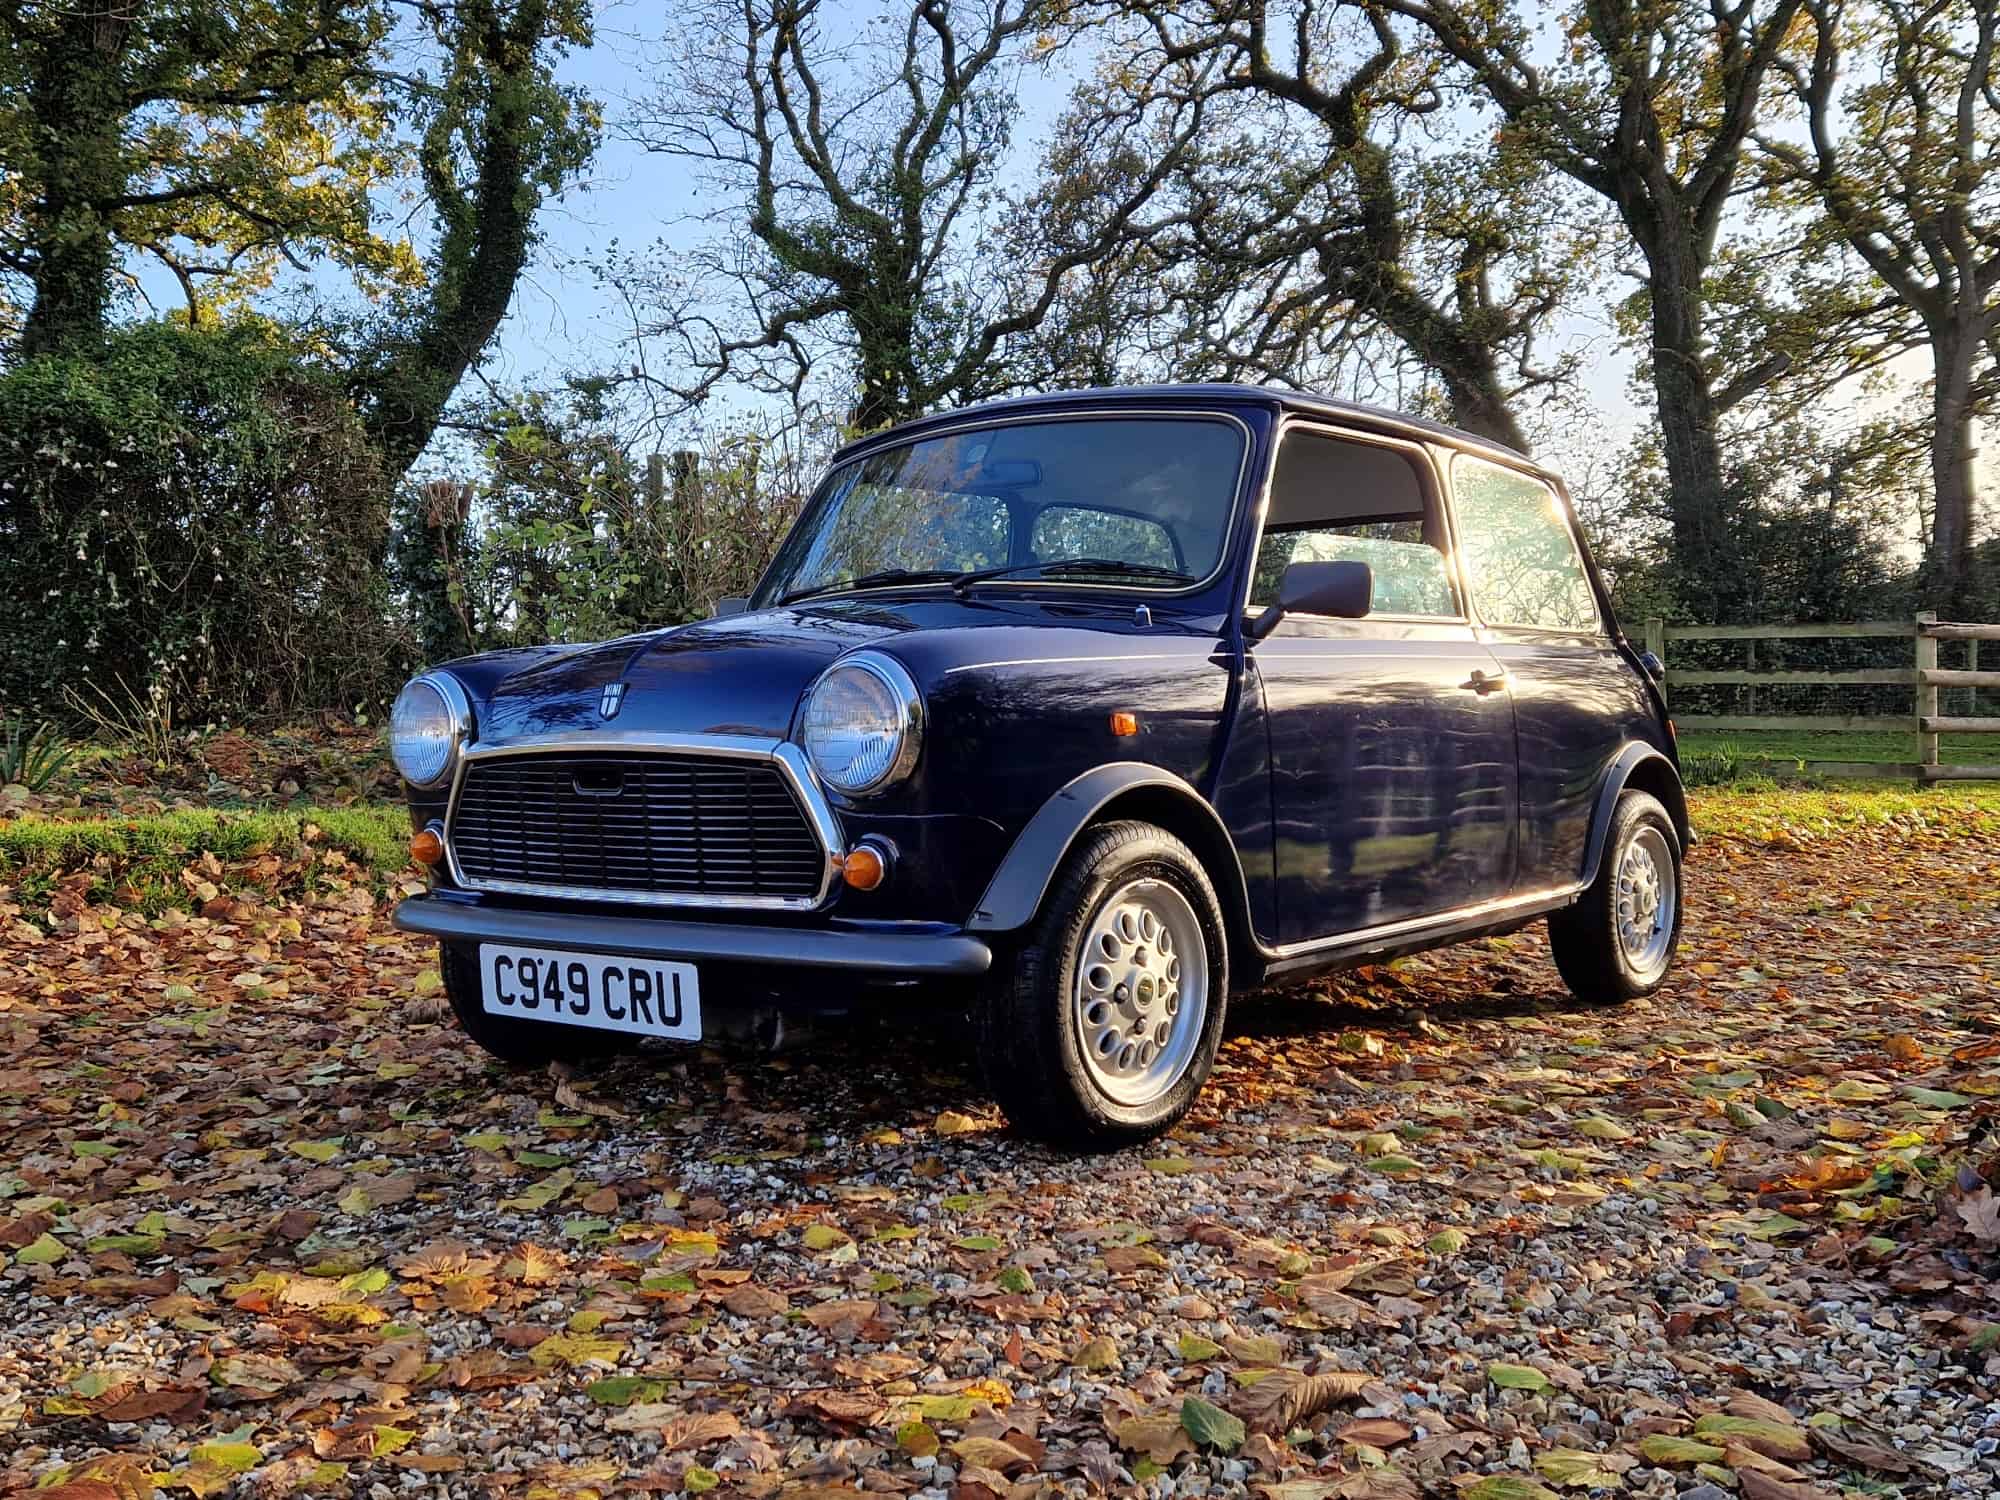 ** NOW SOLD ** 1986 Austin Mini Mayfair 998 cc Automatic On Just 16430 Miles From New